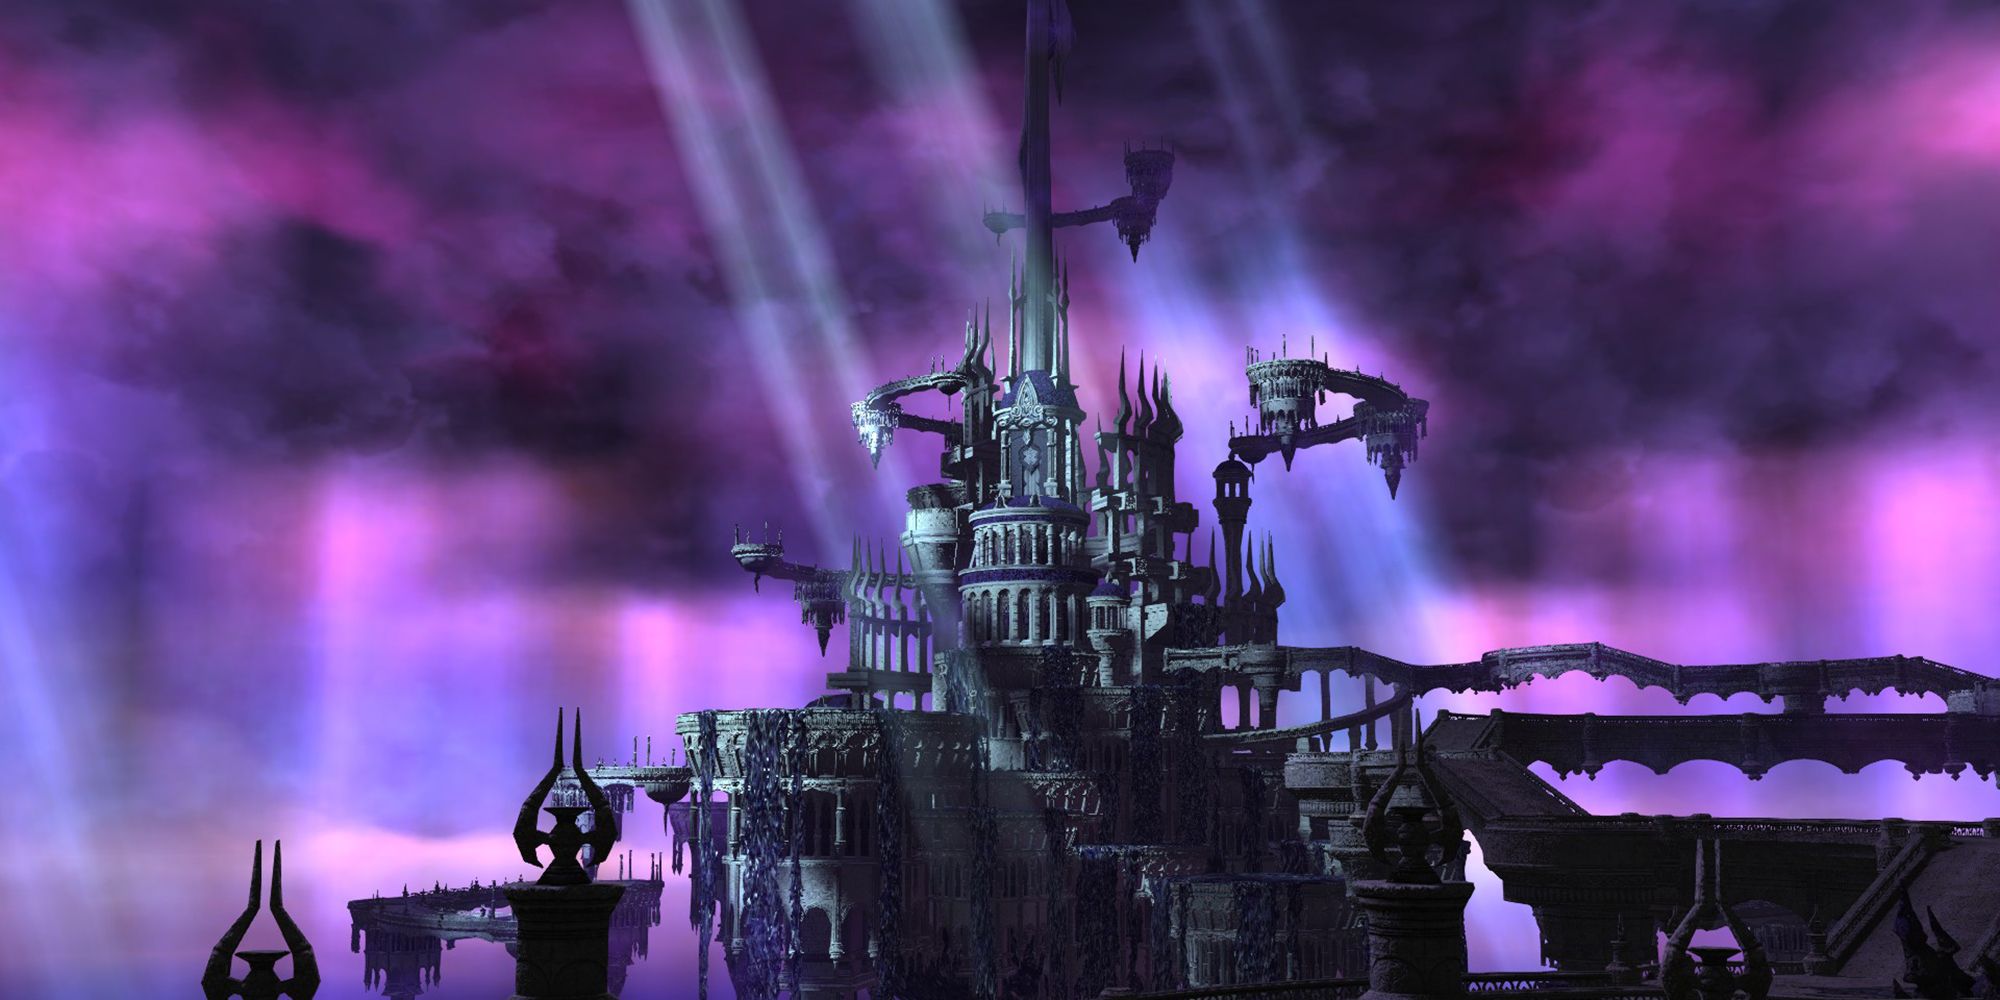 FFXIV: The Fell Court Of Troia Dungeon Guide And Walkthrough